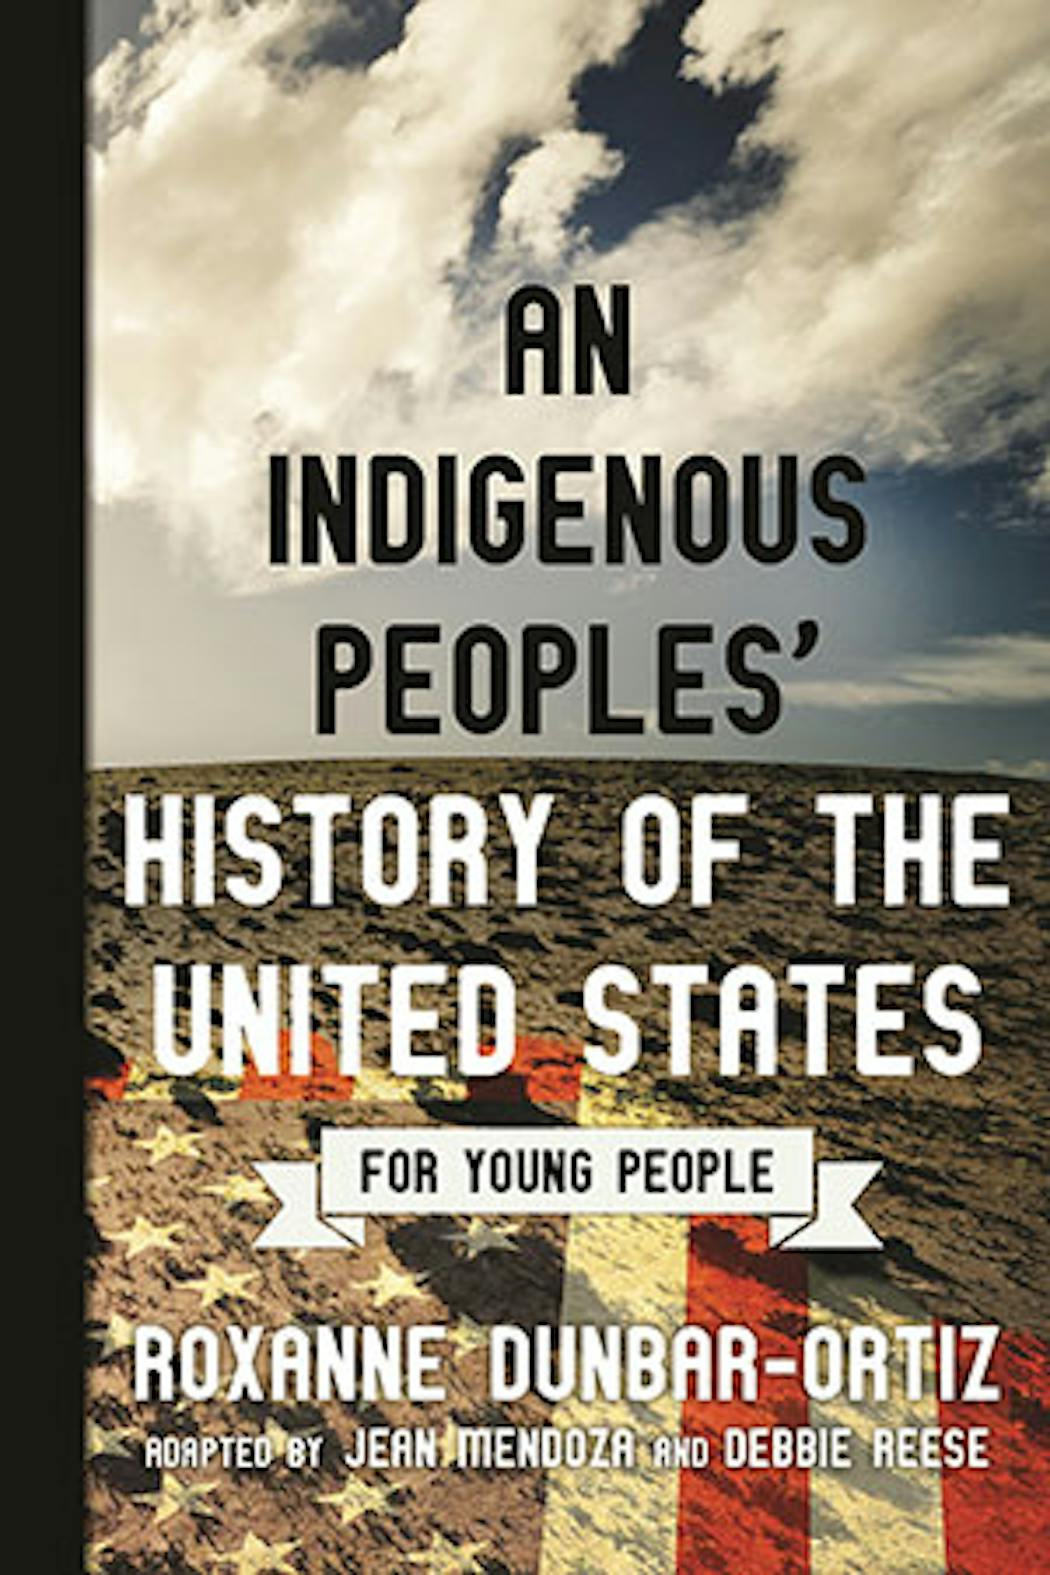 “An Indigenous Peoples’ History of the United States For Young People” by Roxanne Dunbar-Ortiz and adapted by Jean Mendoza and Debbie Reese.